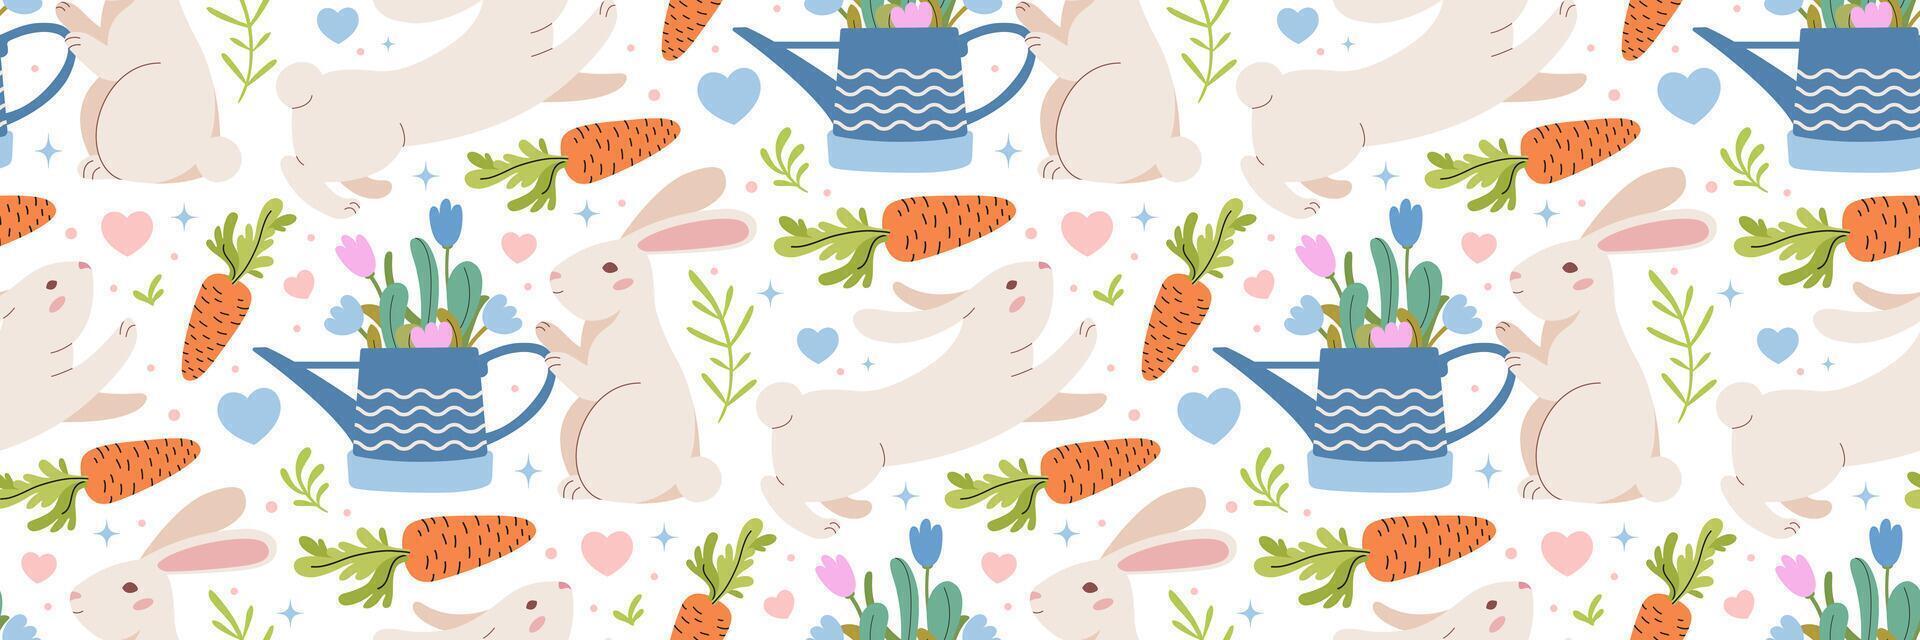 Easter rabbit, carrot and garden watering can seamless pattern. Background with bunnies, vegetation. Traditional festive background. For greeting card, banner, textiles, wallpaper. Vector illustration